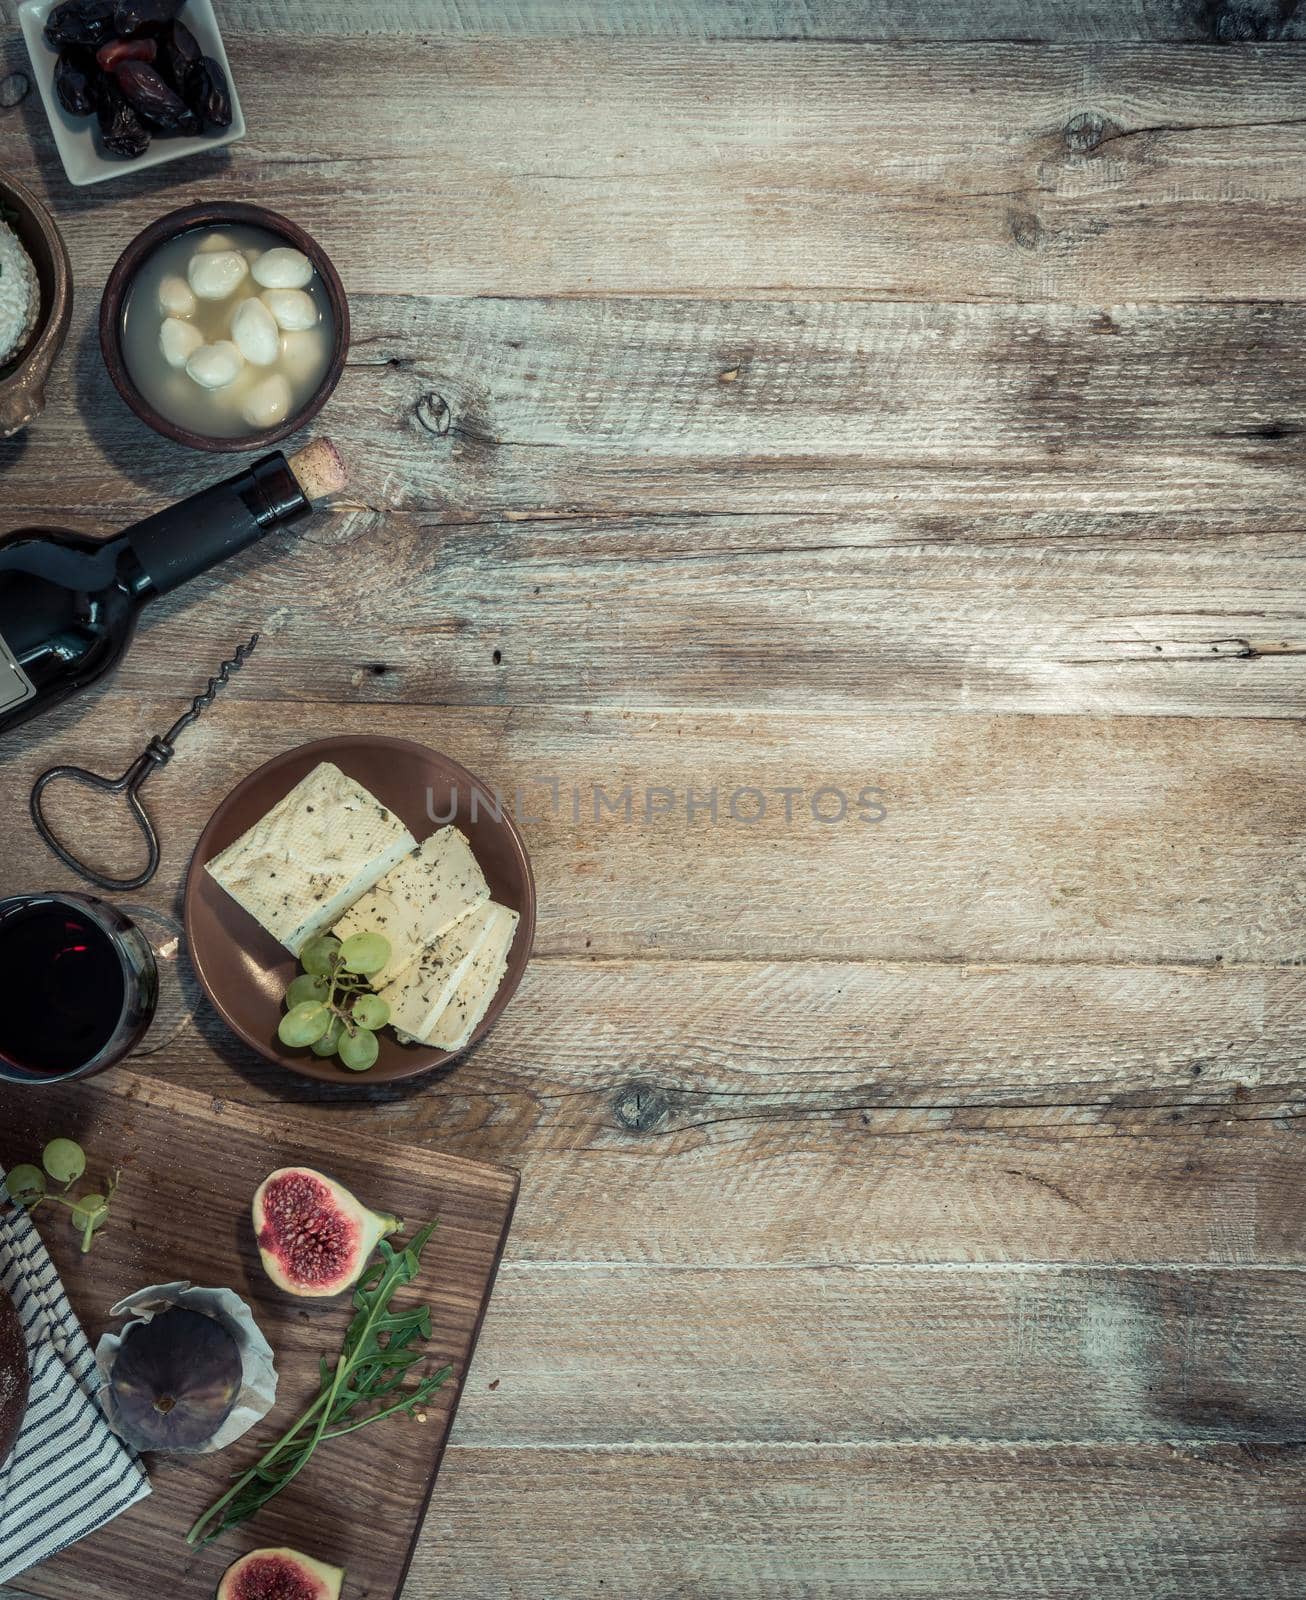 cheeses and brown bread on wooden table with text space